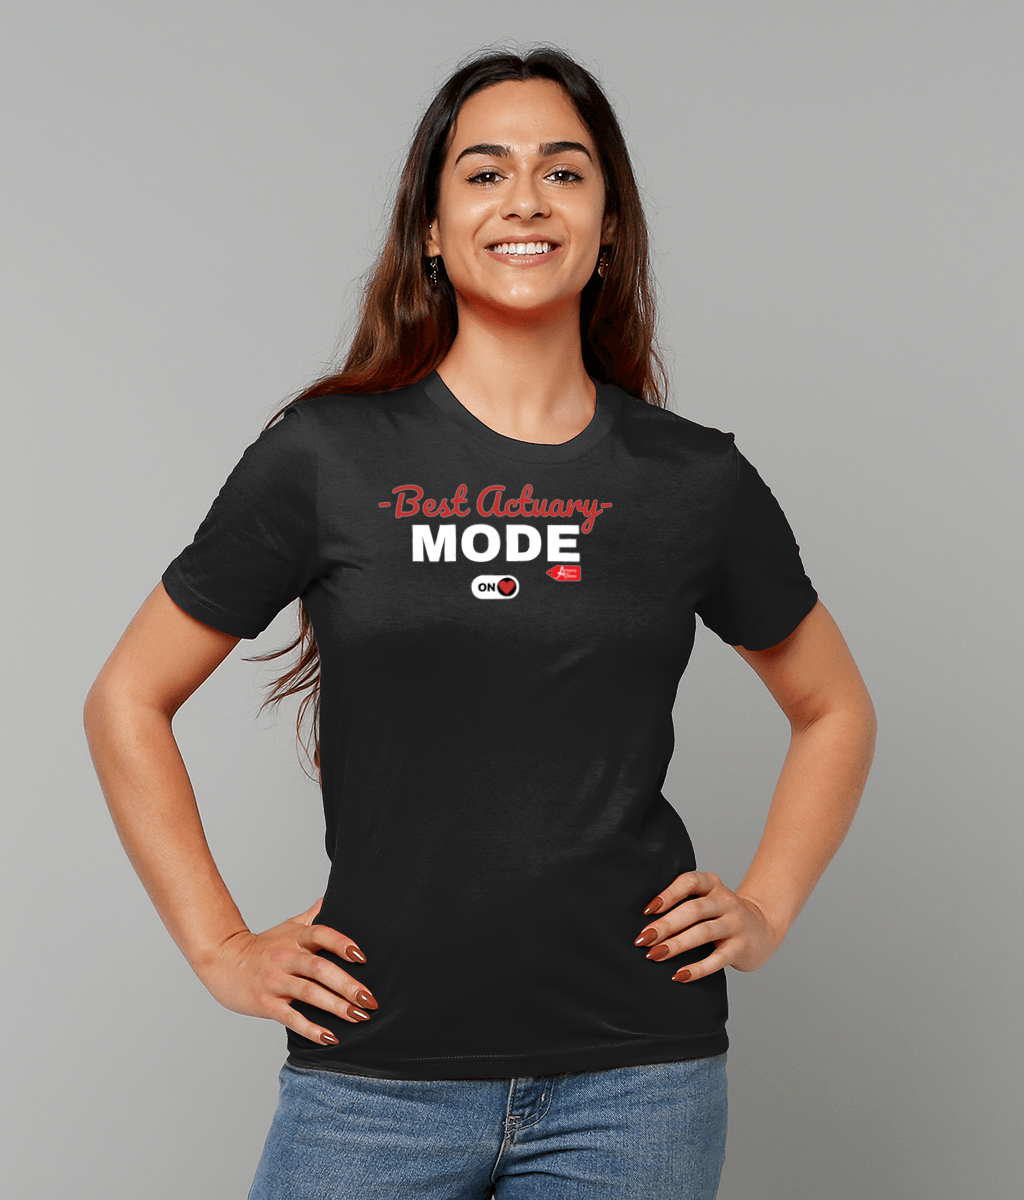 Best Actuary Mode ON T-shirt